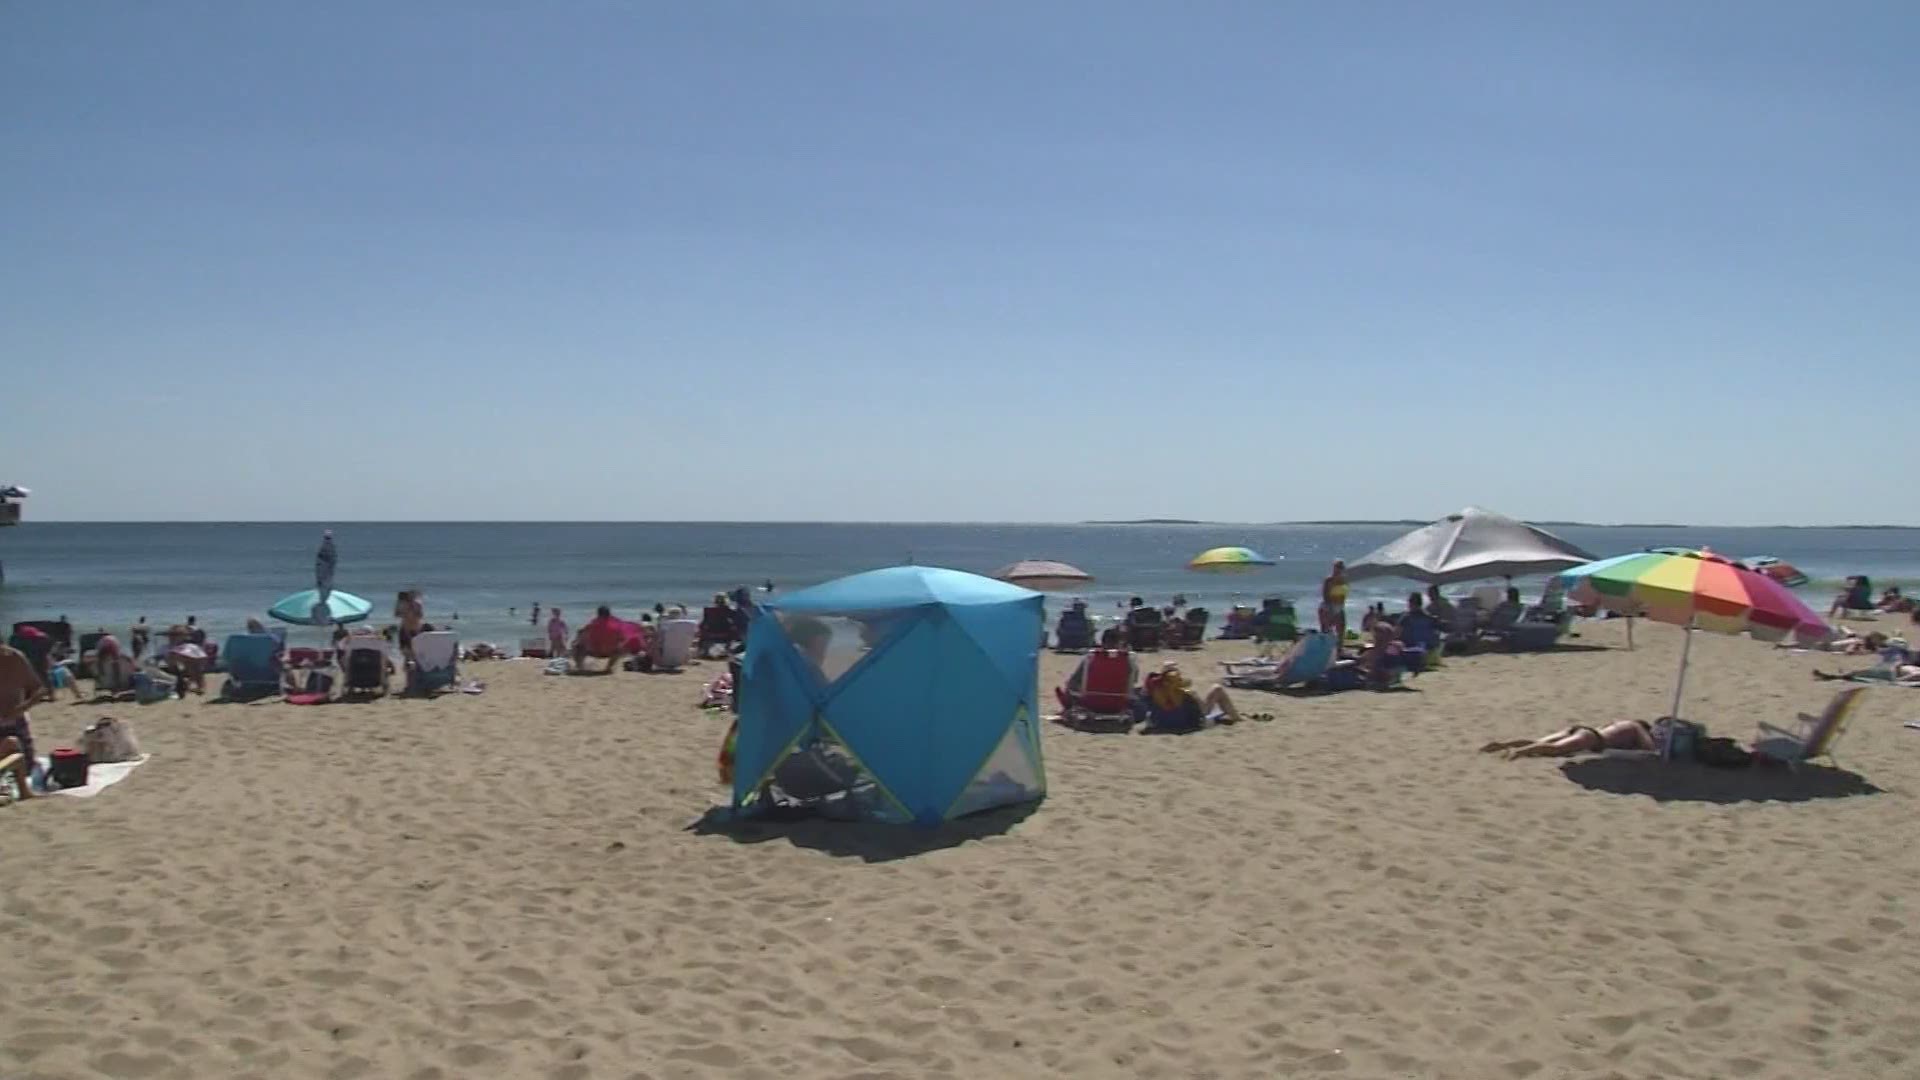 Old Orchard Beach businesses reflect on impacts of coronavirus